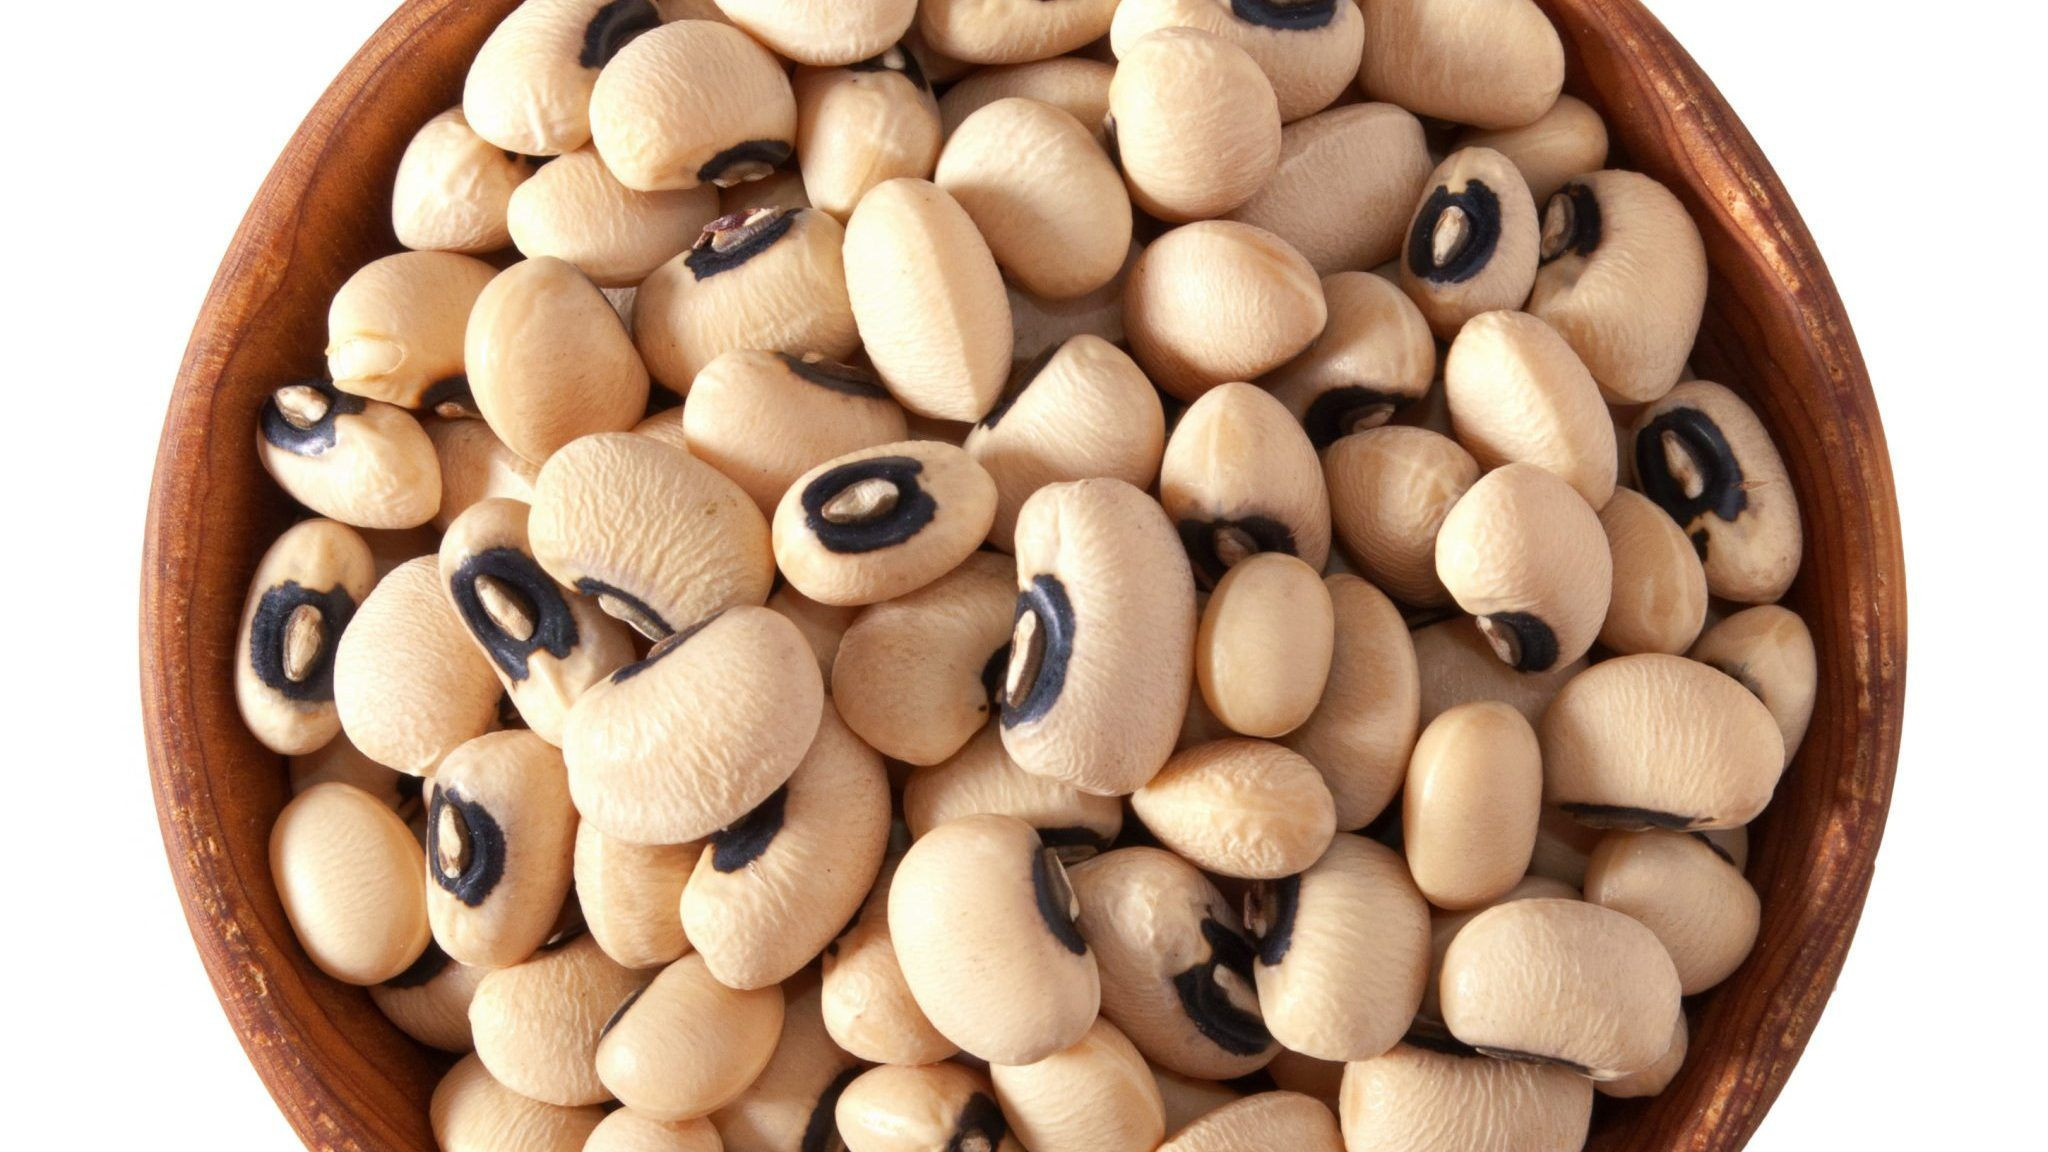 Black Eyed Beans/Black eyed peas - in stock and affordable. wholesale prices